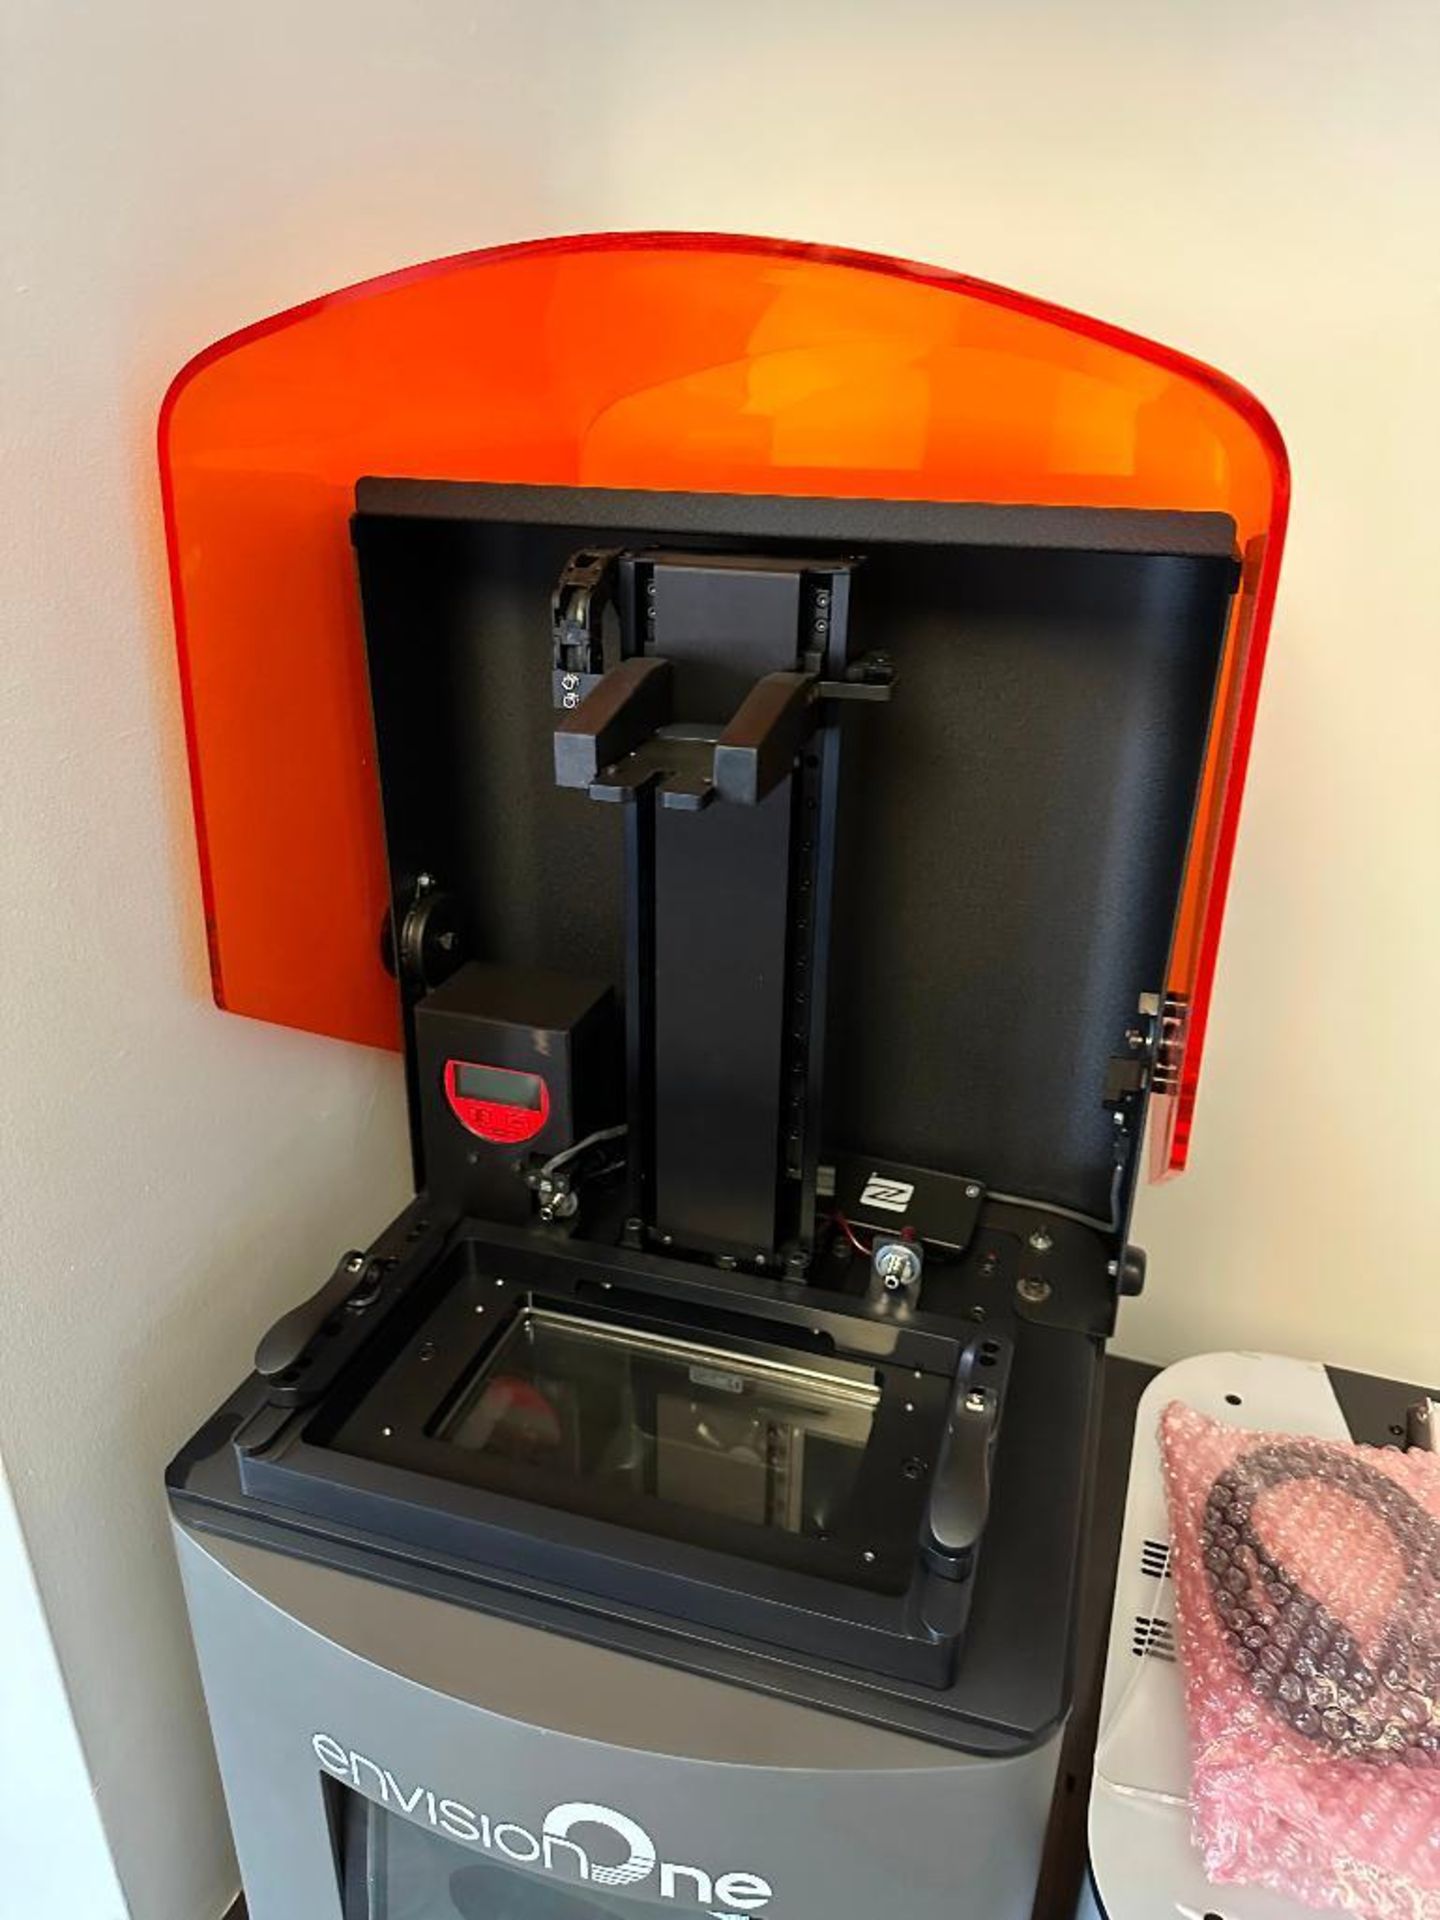 EnvisionOne cDLM Professional Resin 3D Printer w/ Parts Curing & Washing, Oxygen Concentrator, etc. - Image 4 of 19